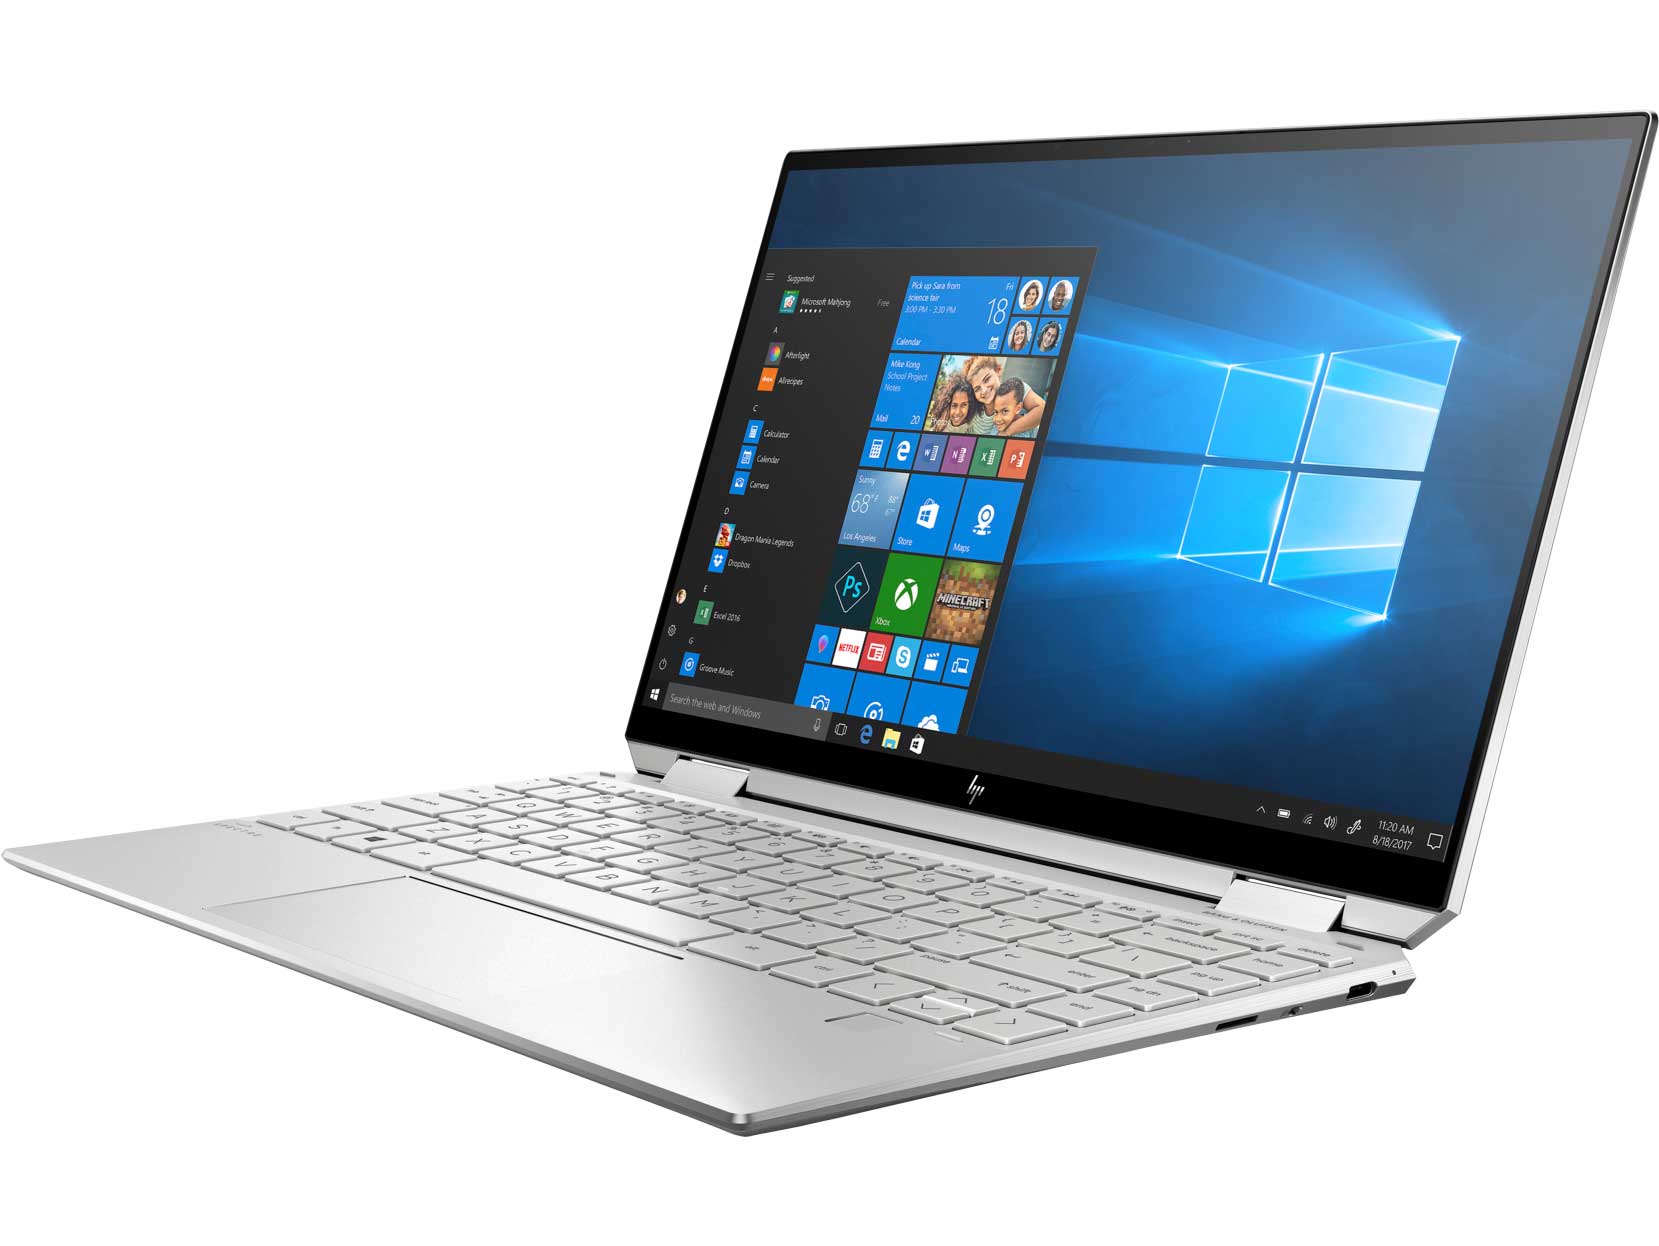 HP Spectre X360 laptop for podcasting